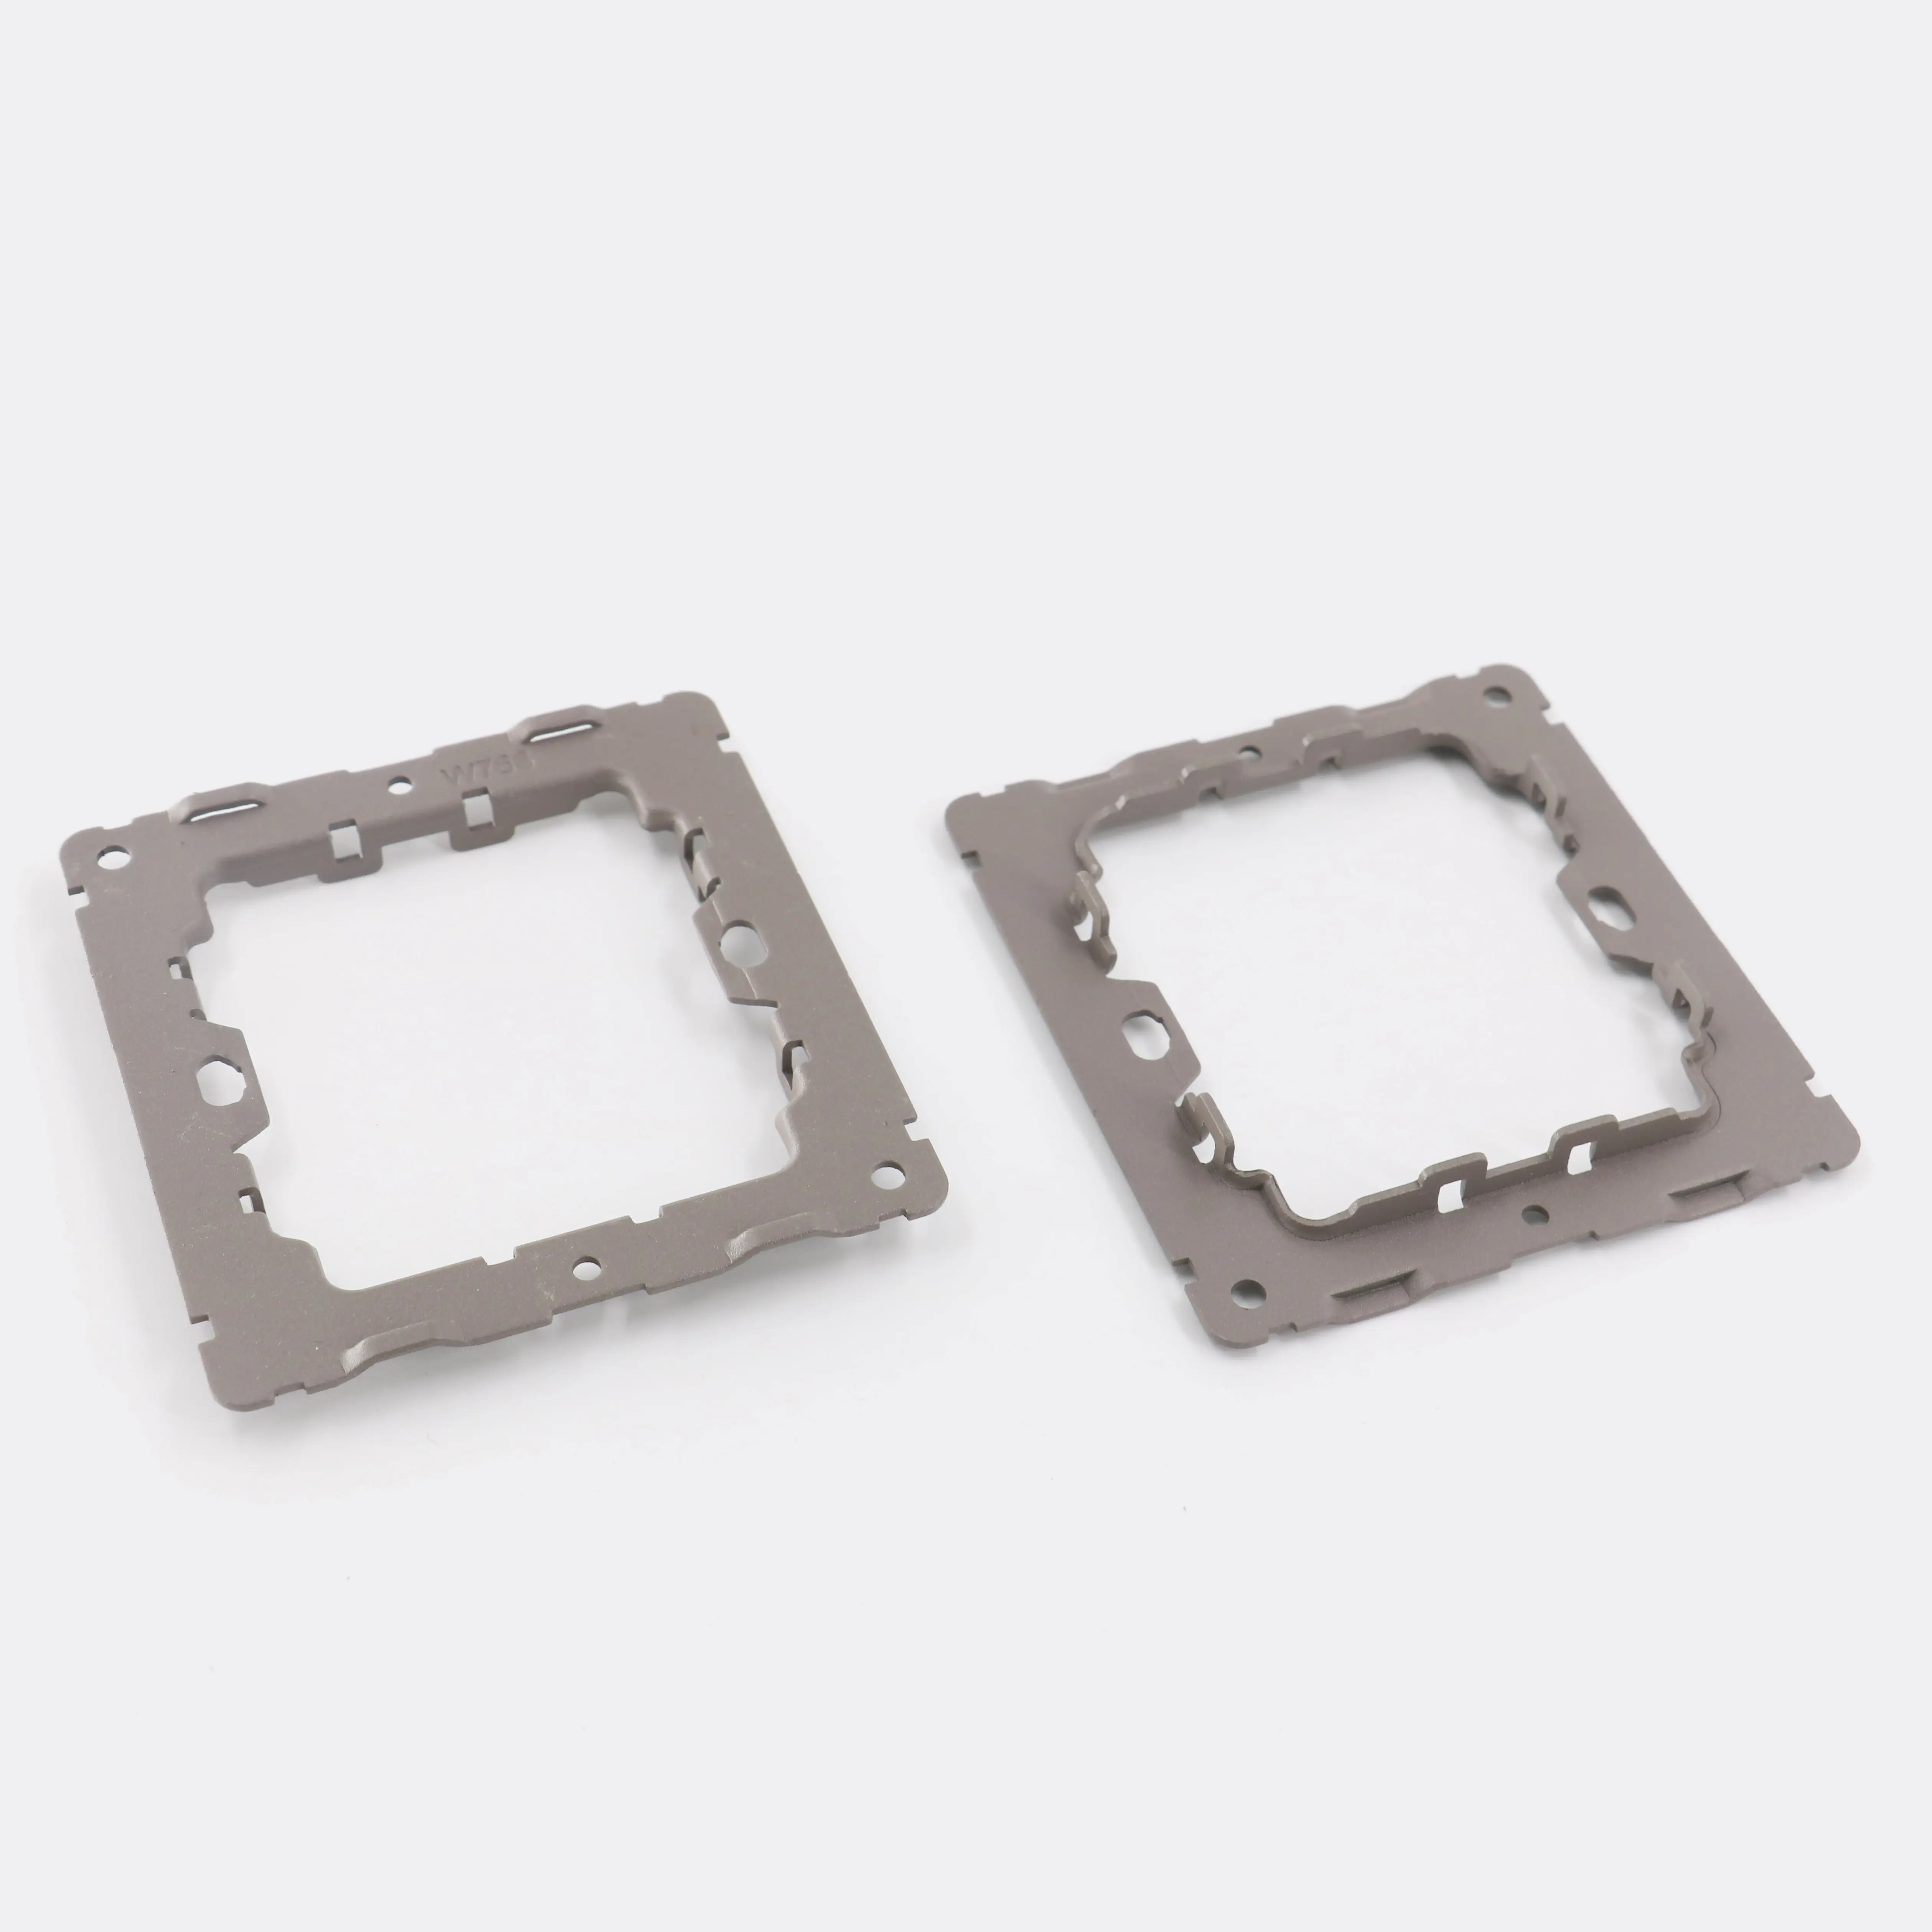 China manufacture customized electrical socket metal brackets metallic stamping frames for switches sockets